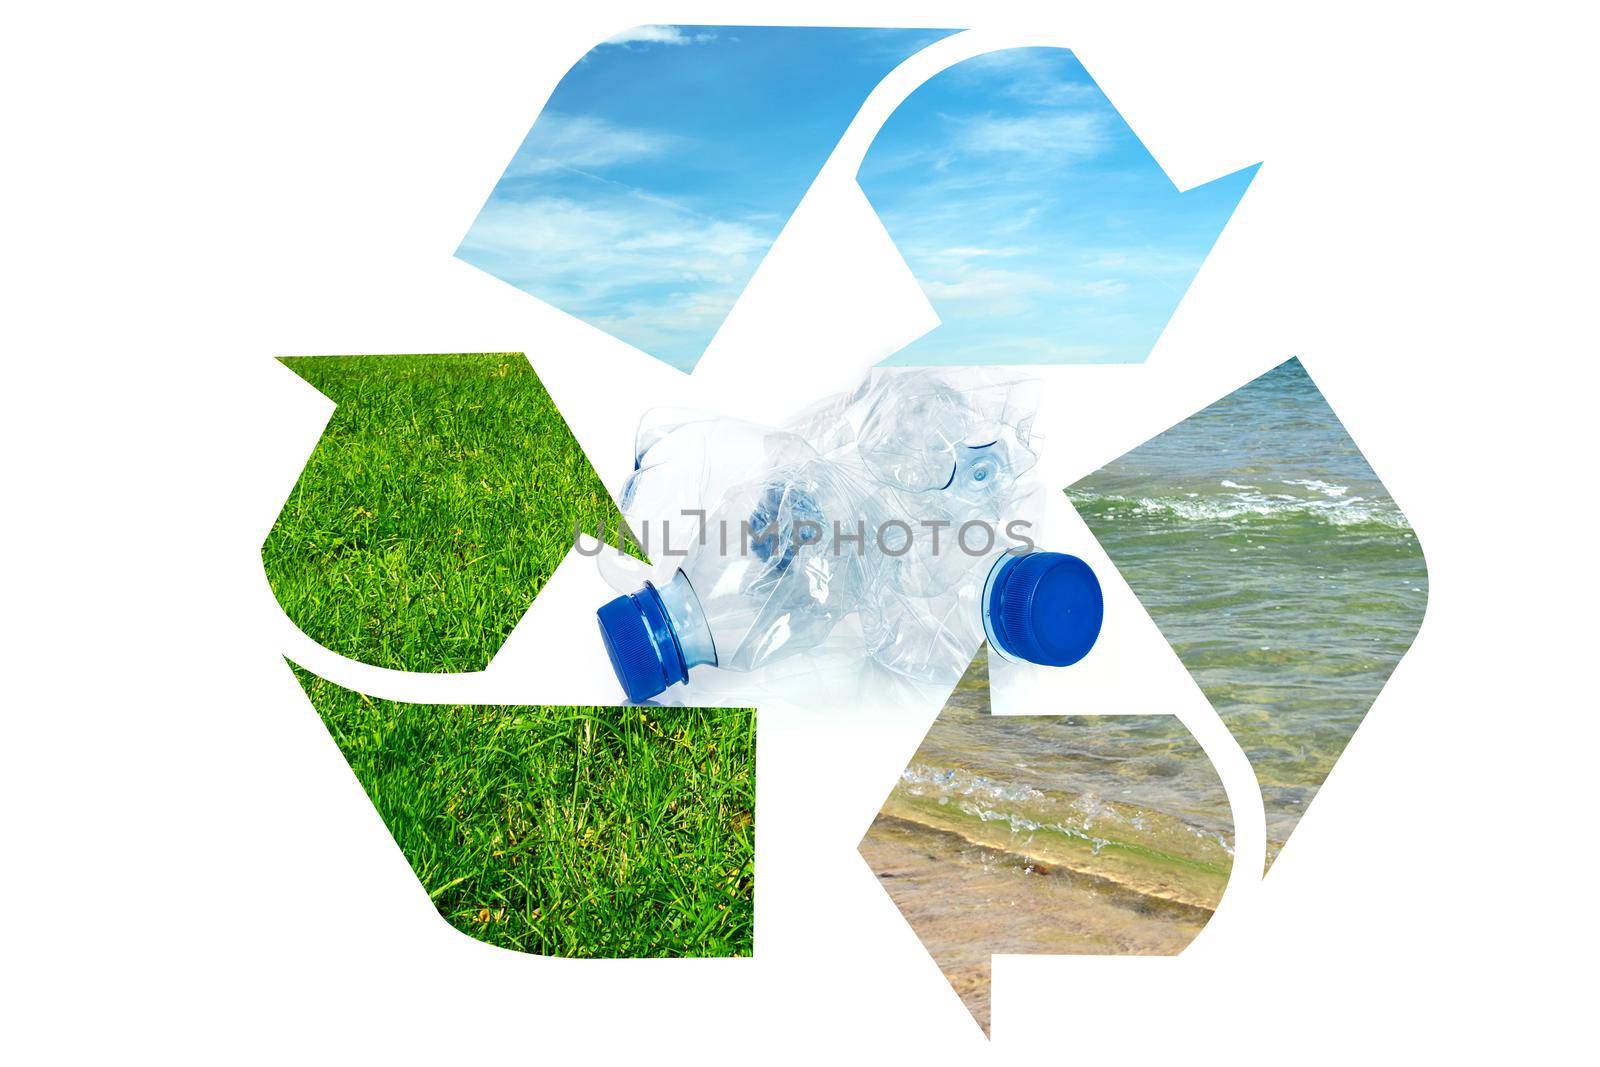 Global recycle system by wdnet_studio